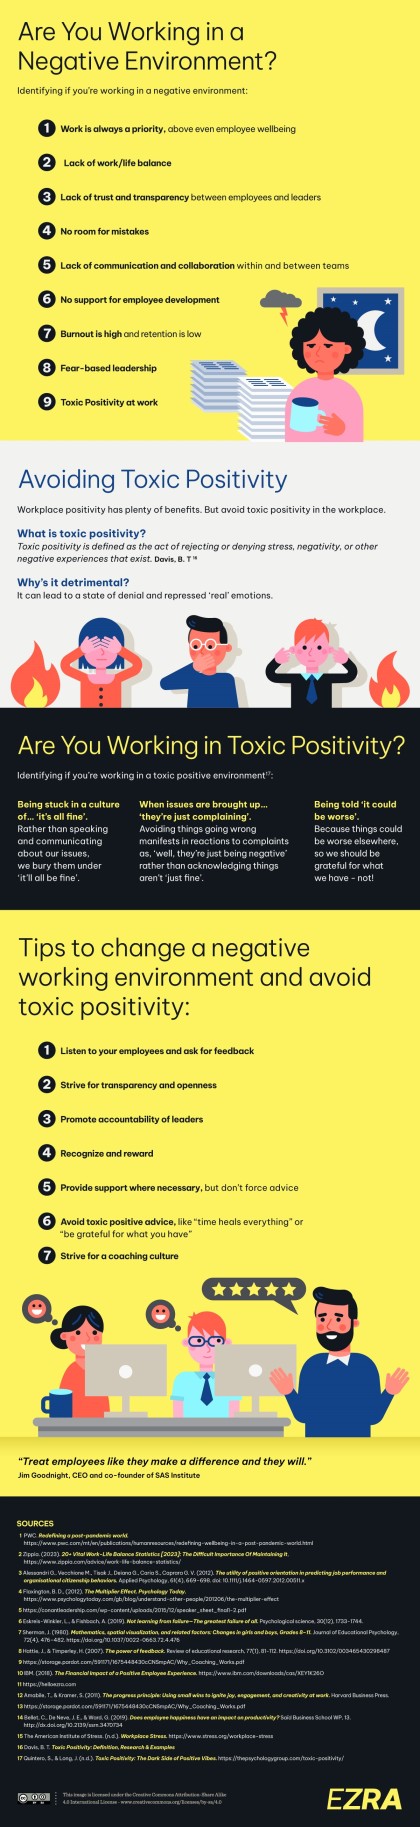 How to Avoid Toxic Positivity in the Workplace-2